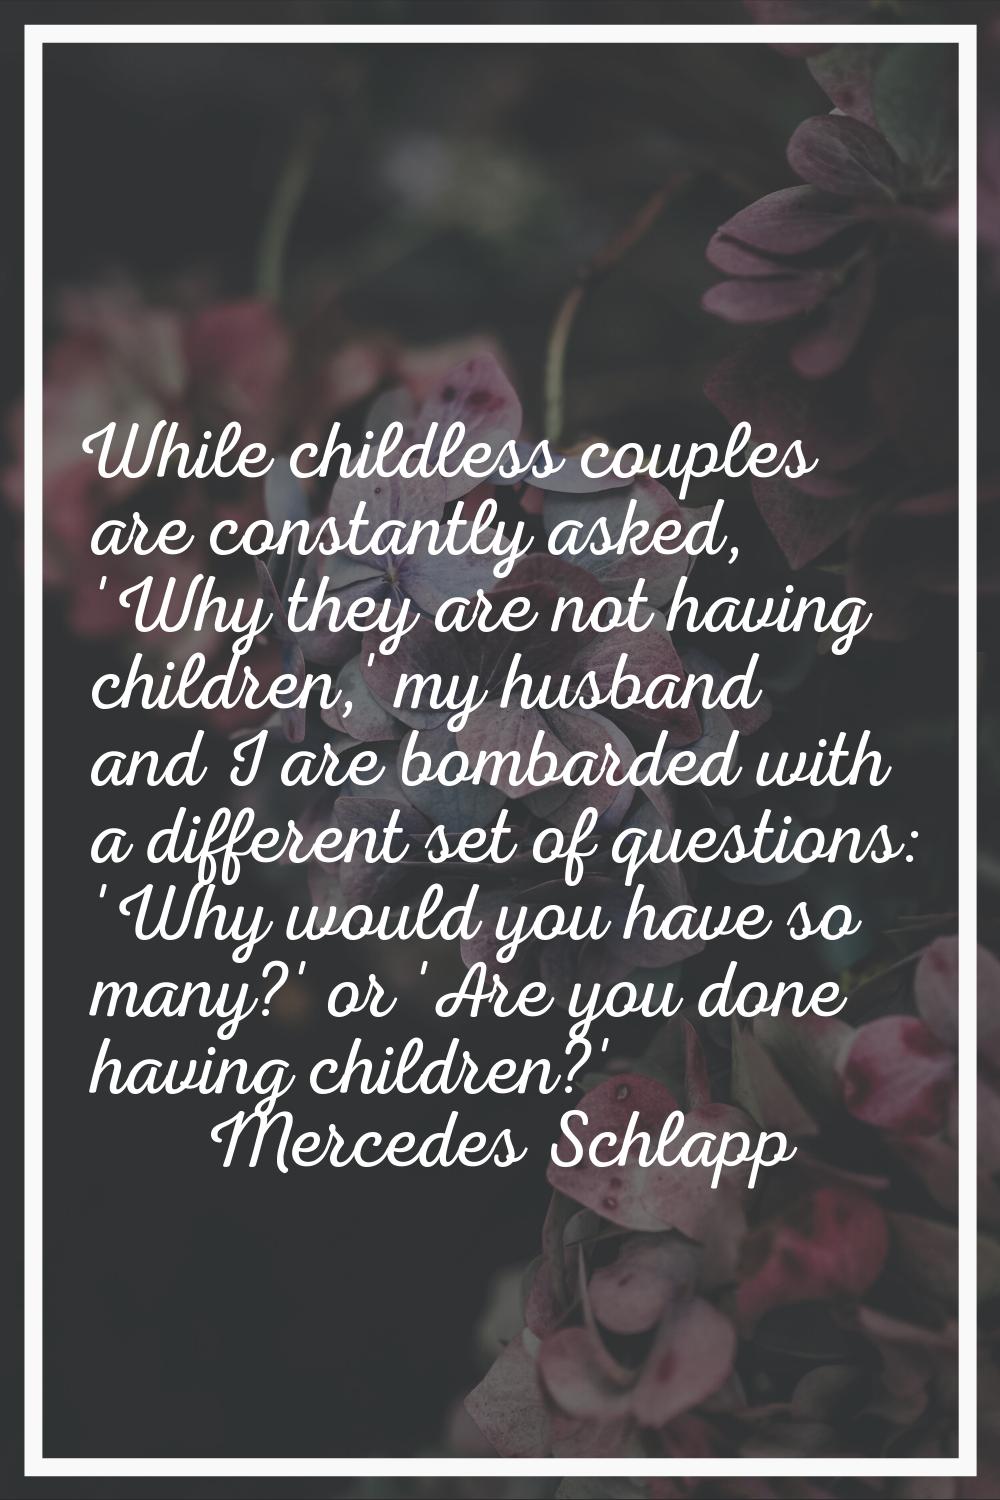 While childless couples are constantly asked, 'Why they are not having children,' my husband and I 